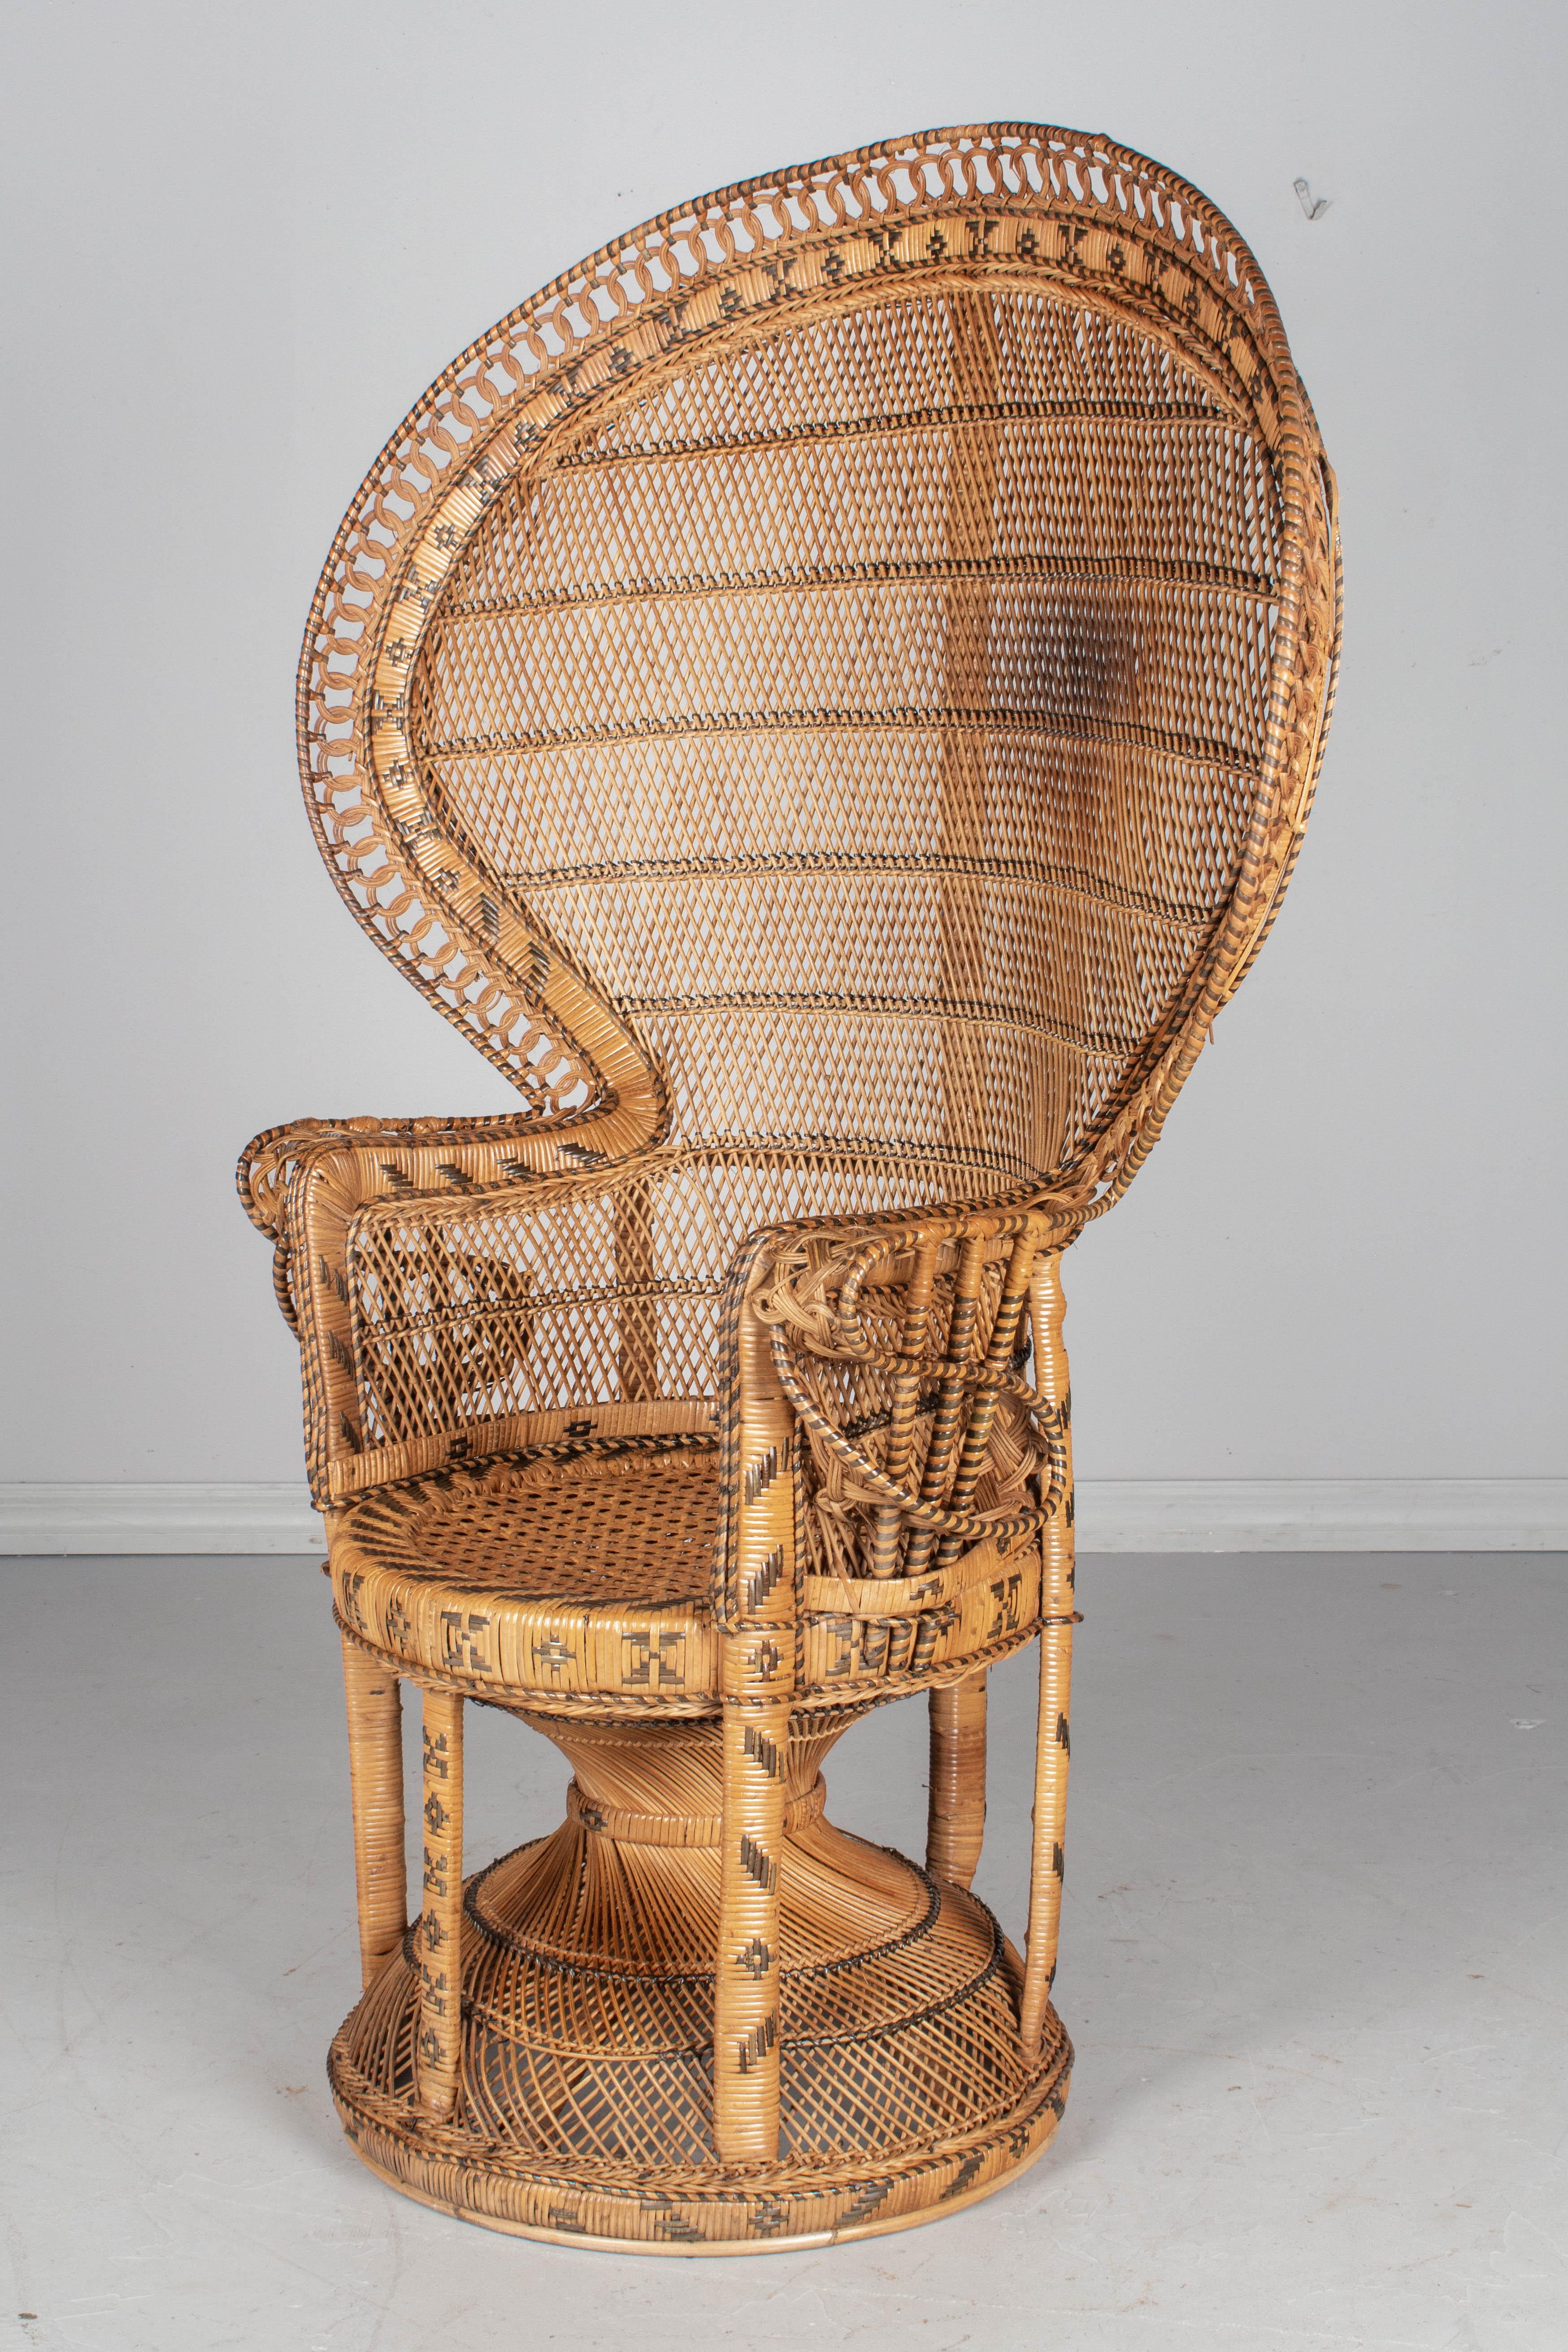 A vintage French peacock armchair, with full fan back, made of handwoven rattan and produced by the French company Kok Maison in the 1970s. A stunning boho chic statement piece, beautifully crafted with intricate detailing, especially in the curved